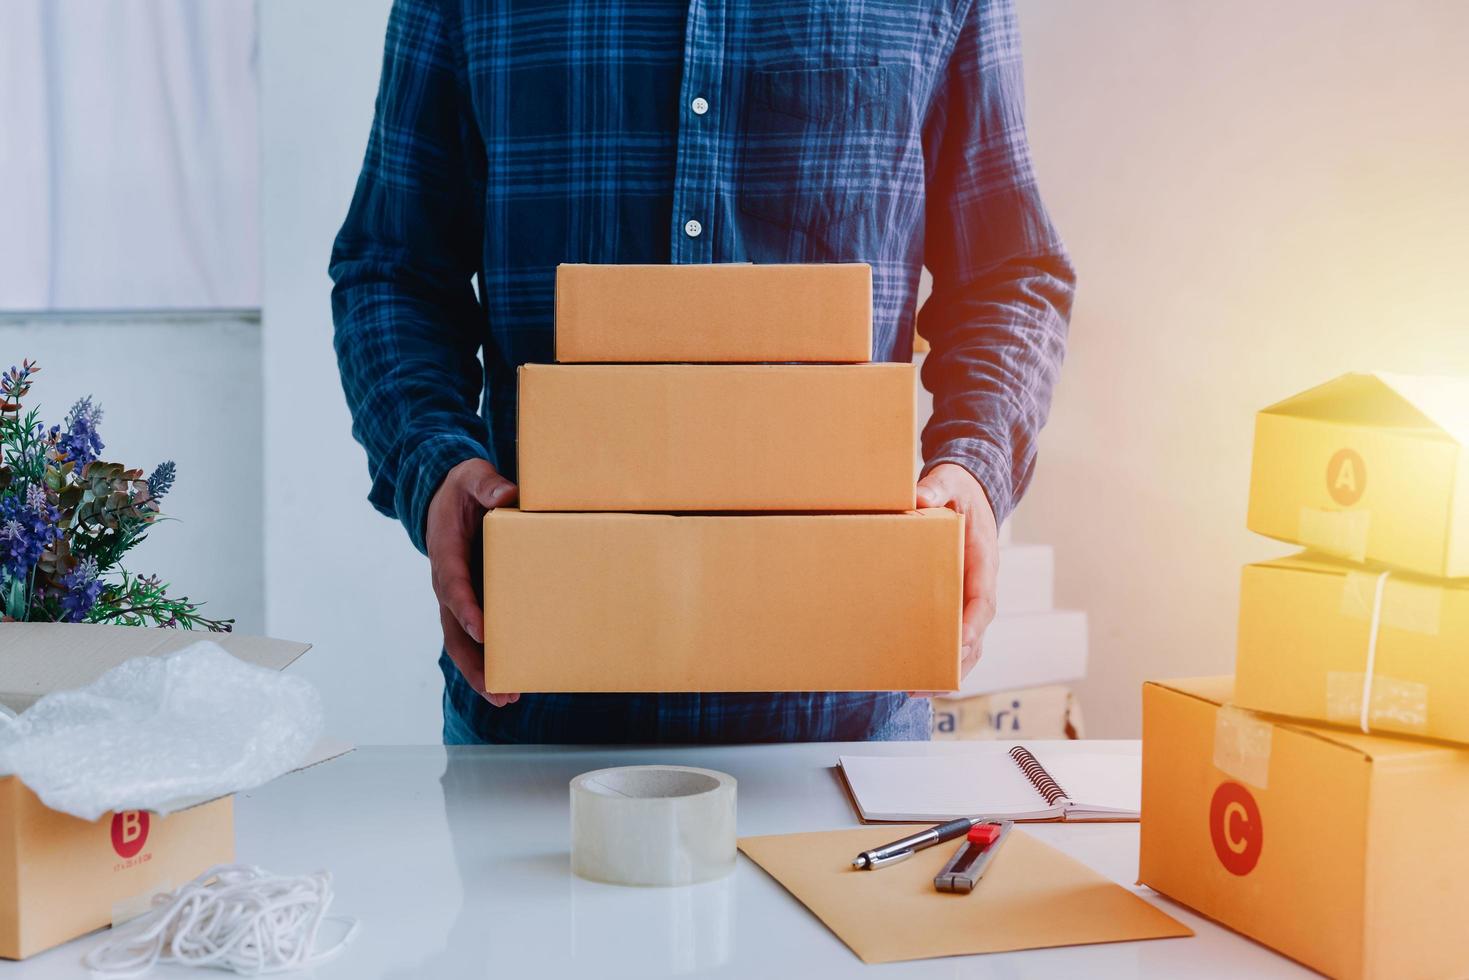 Close-up view of man's online store, small business owner seller, entrepreneur packing package post shipping box preparing delivery parcel on the table, entrepreneurial self-employed business concept photo